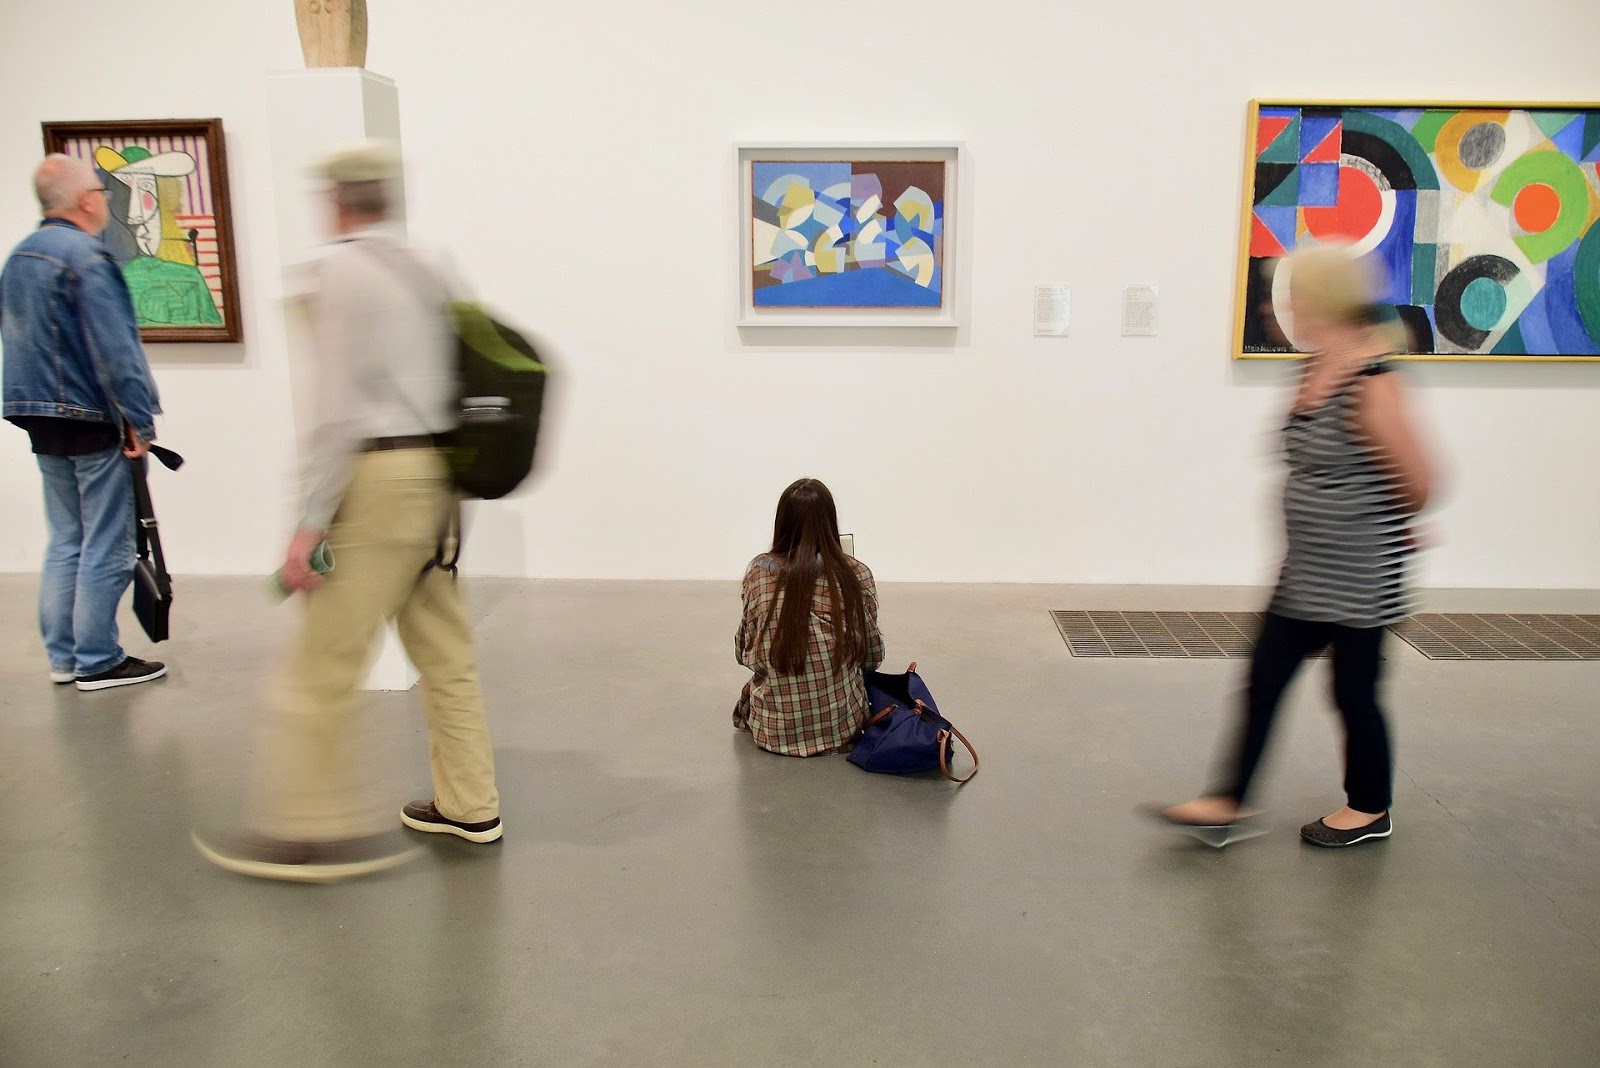 an image of an art gallary with people walking and admiring